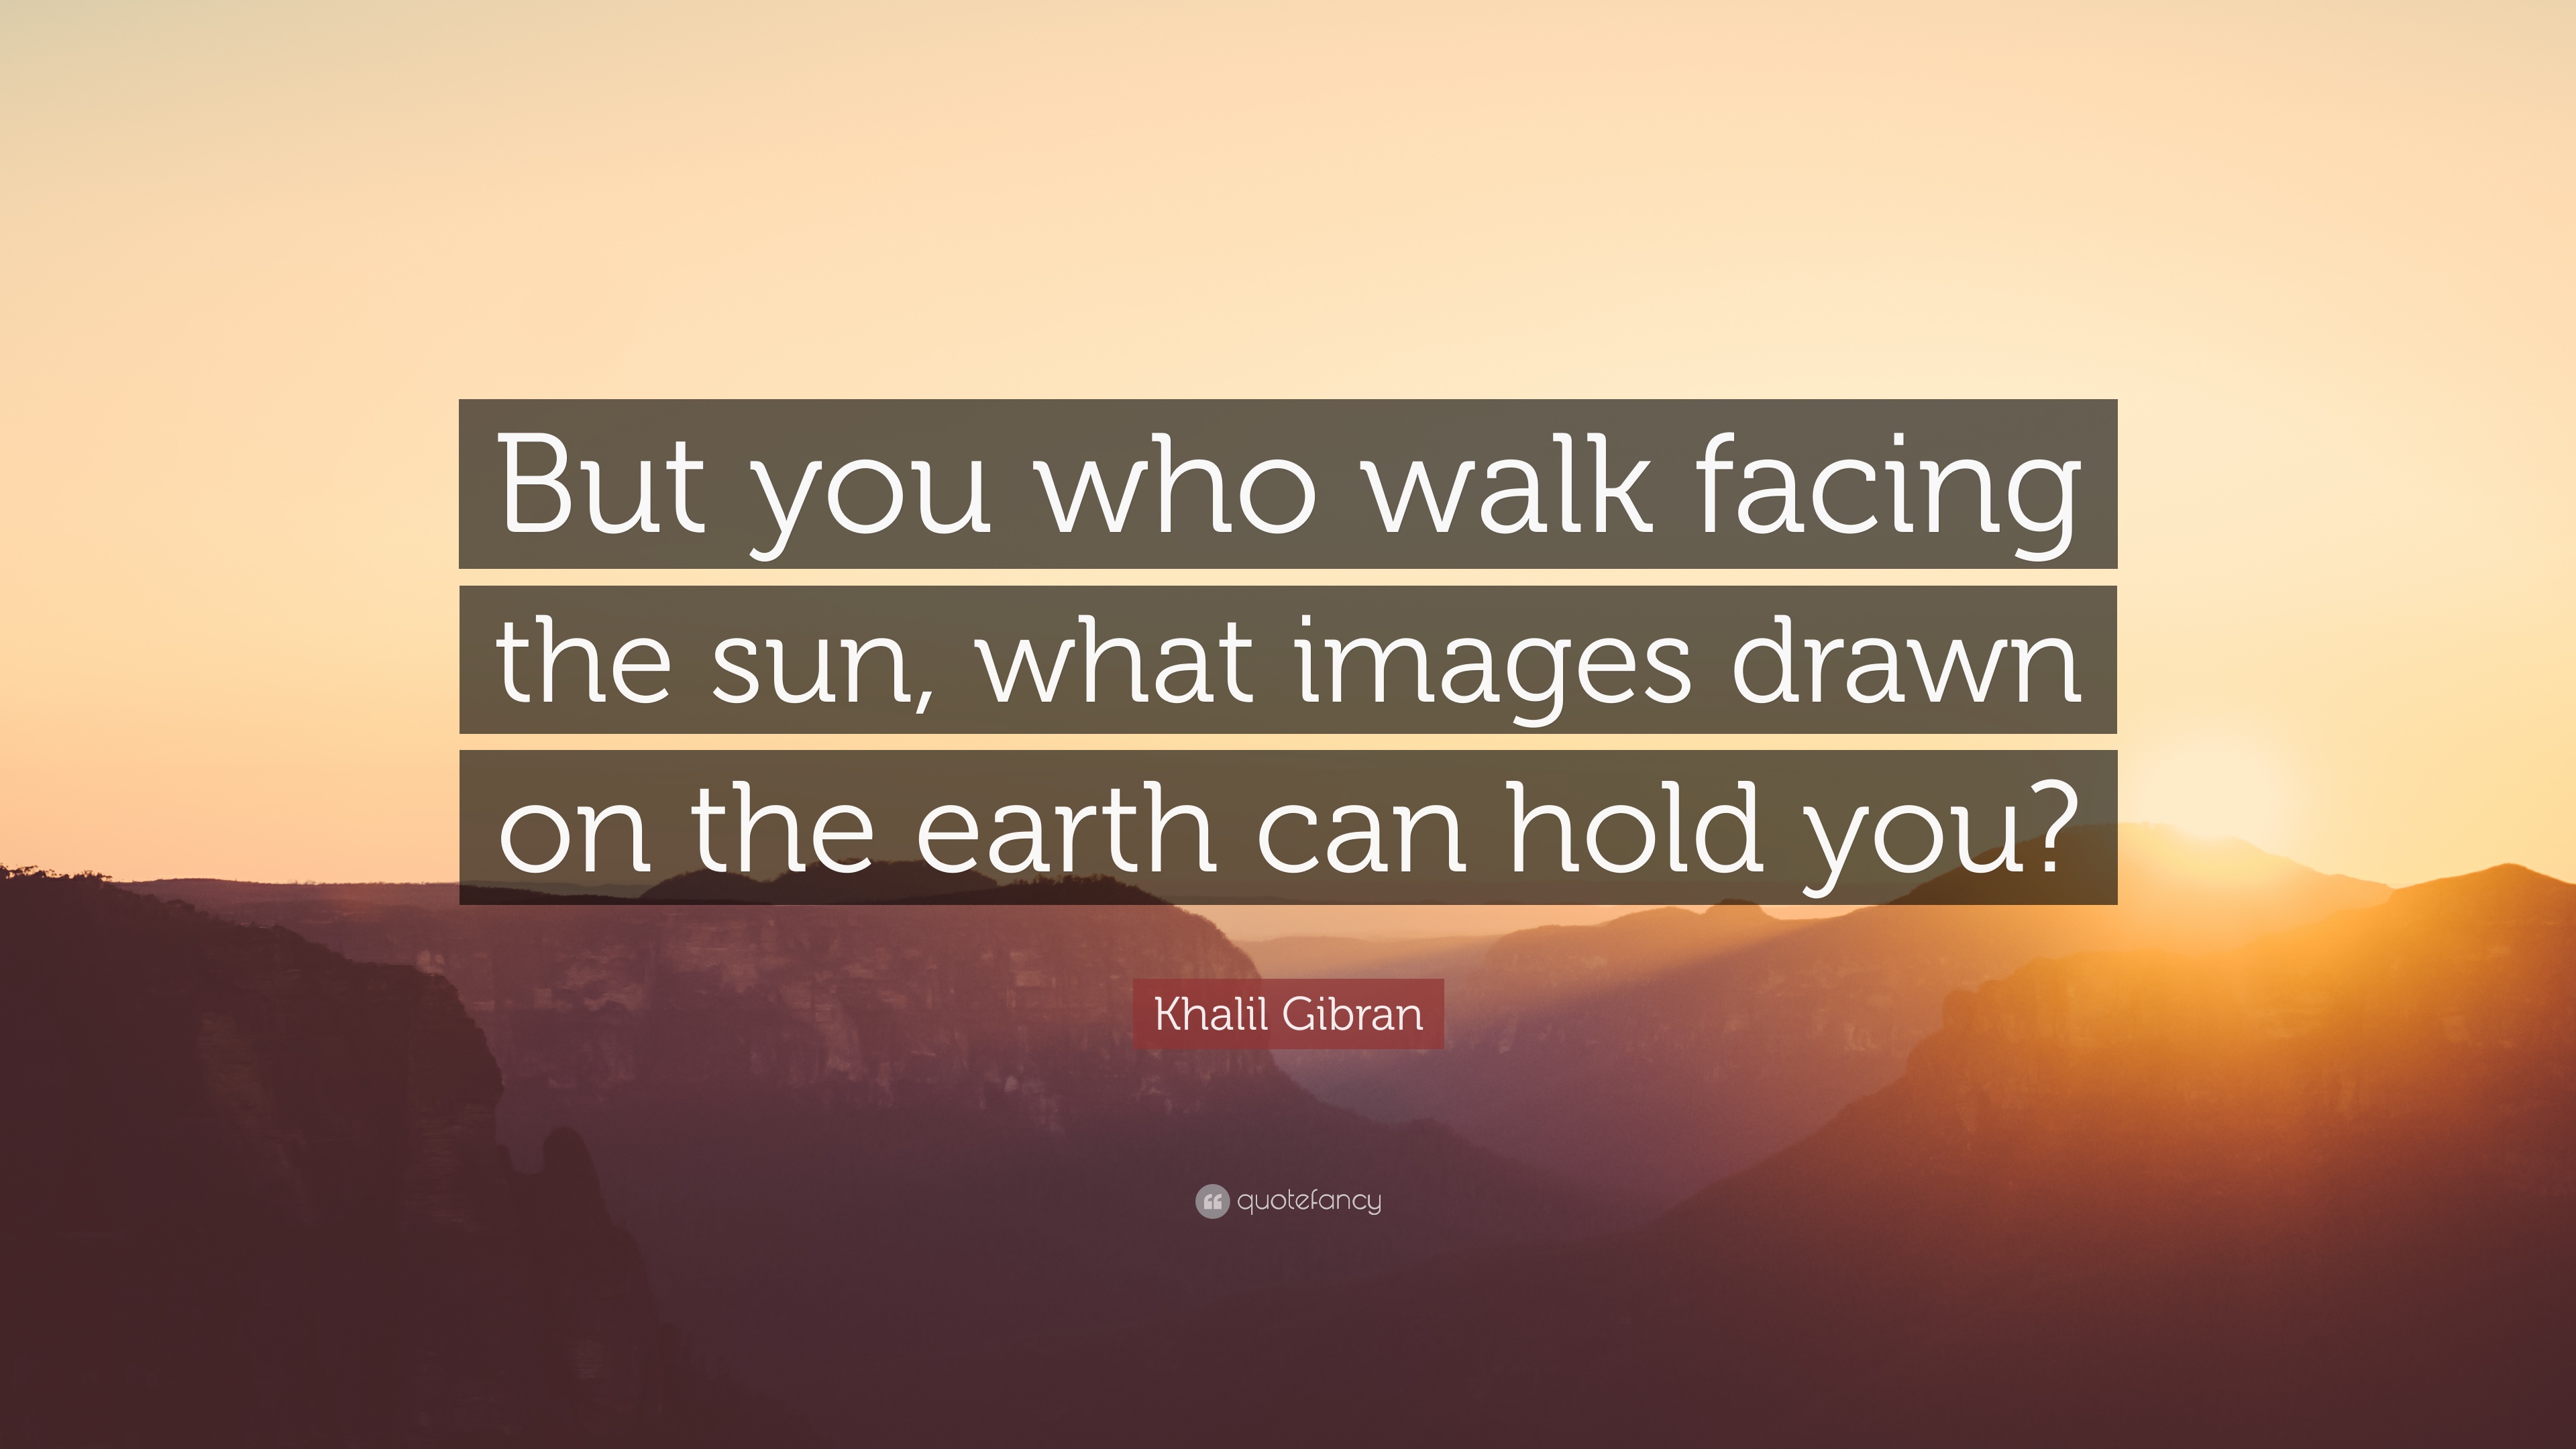 Khalil Gibran Quote: “But you who walk facing the sun, what images ...